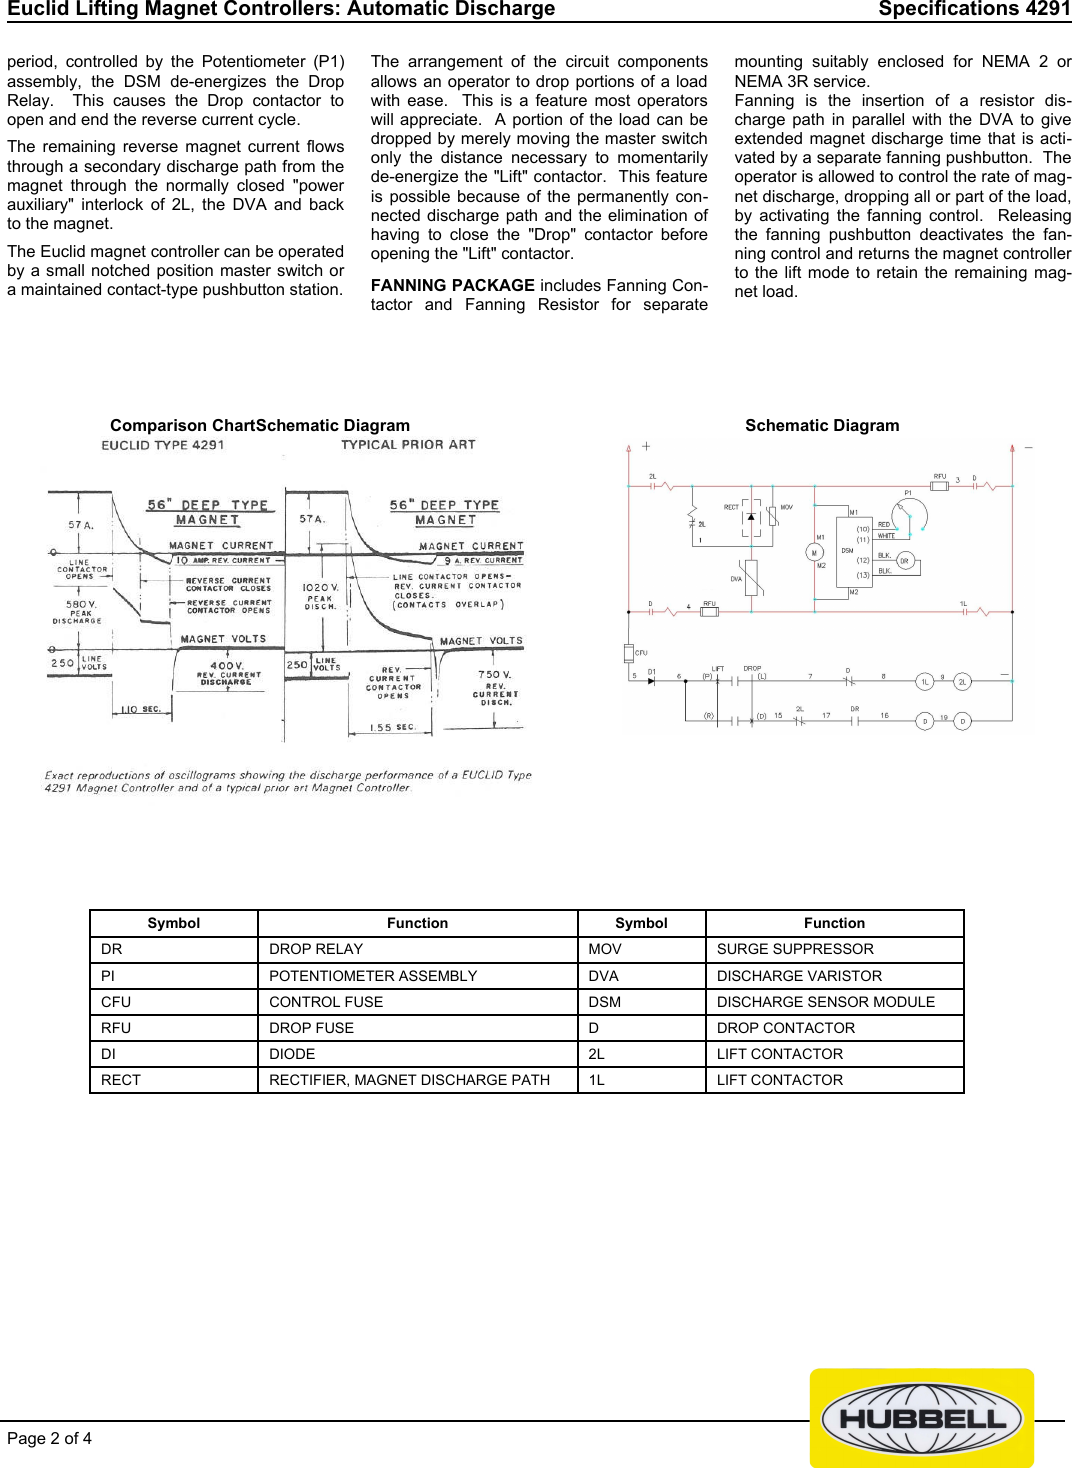 Page 2 of 4 - Hubbell Hubbell-Euclid-Lifting-Magnet-Controller-4291-Users-Manual- Specification 4291  Hubbell-euclid-lifting-magnet-controller-4291-users-manual